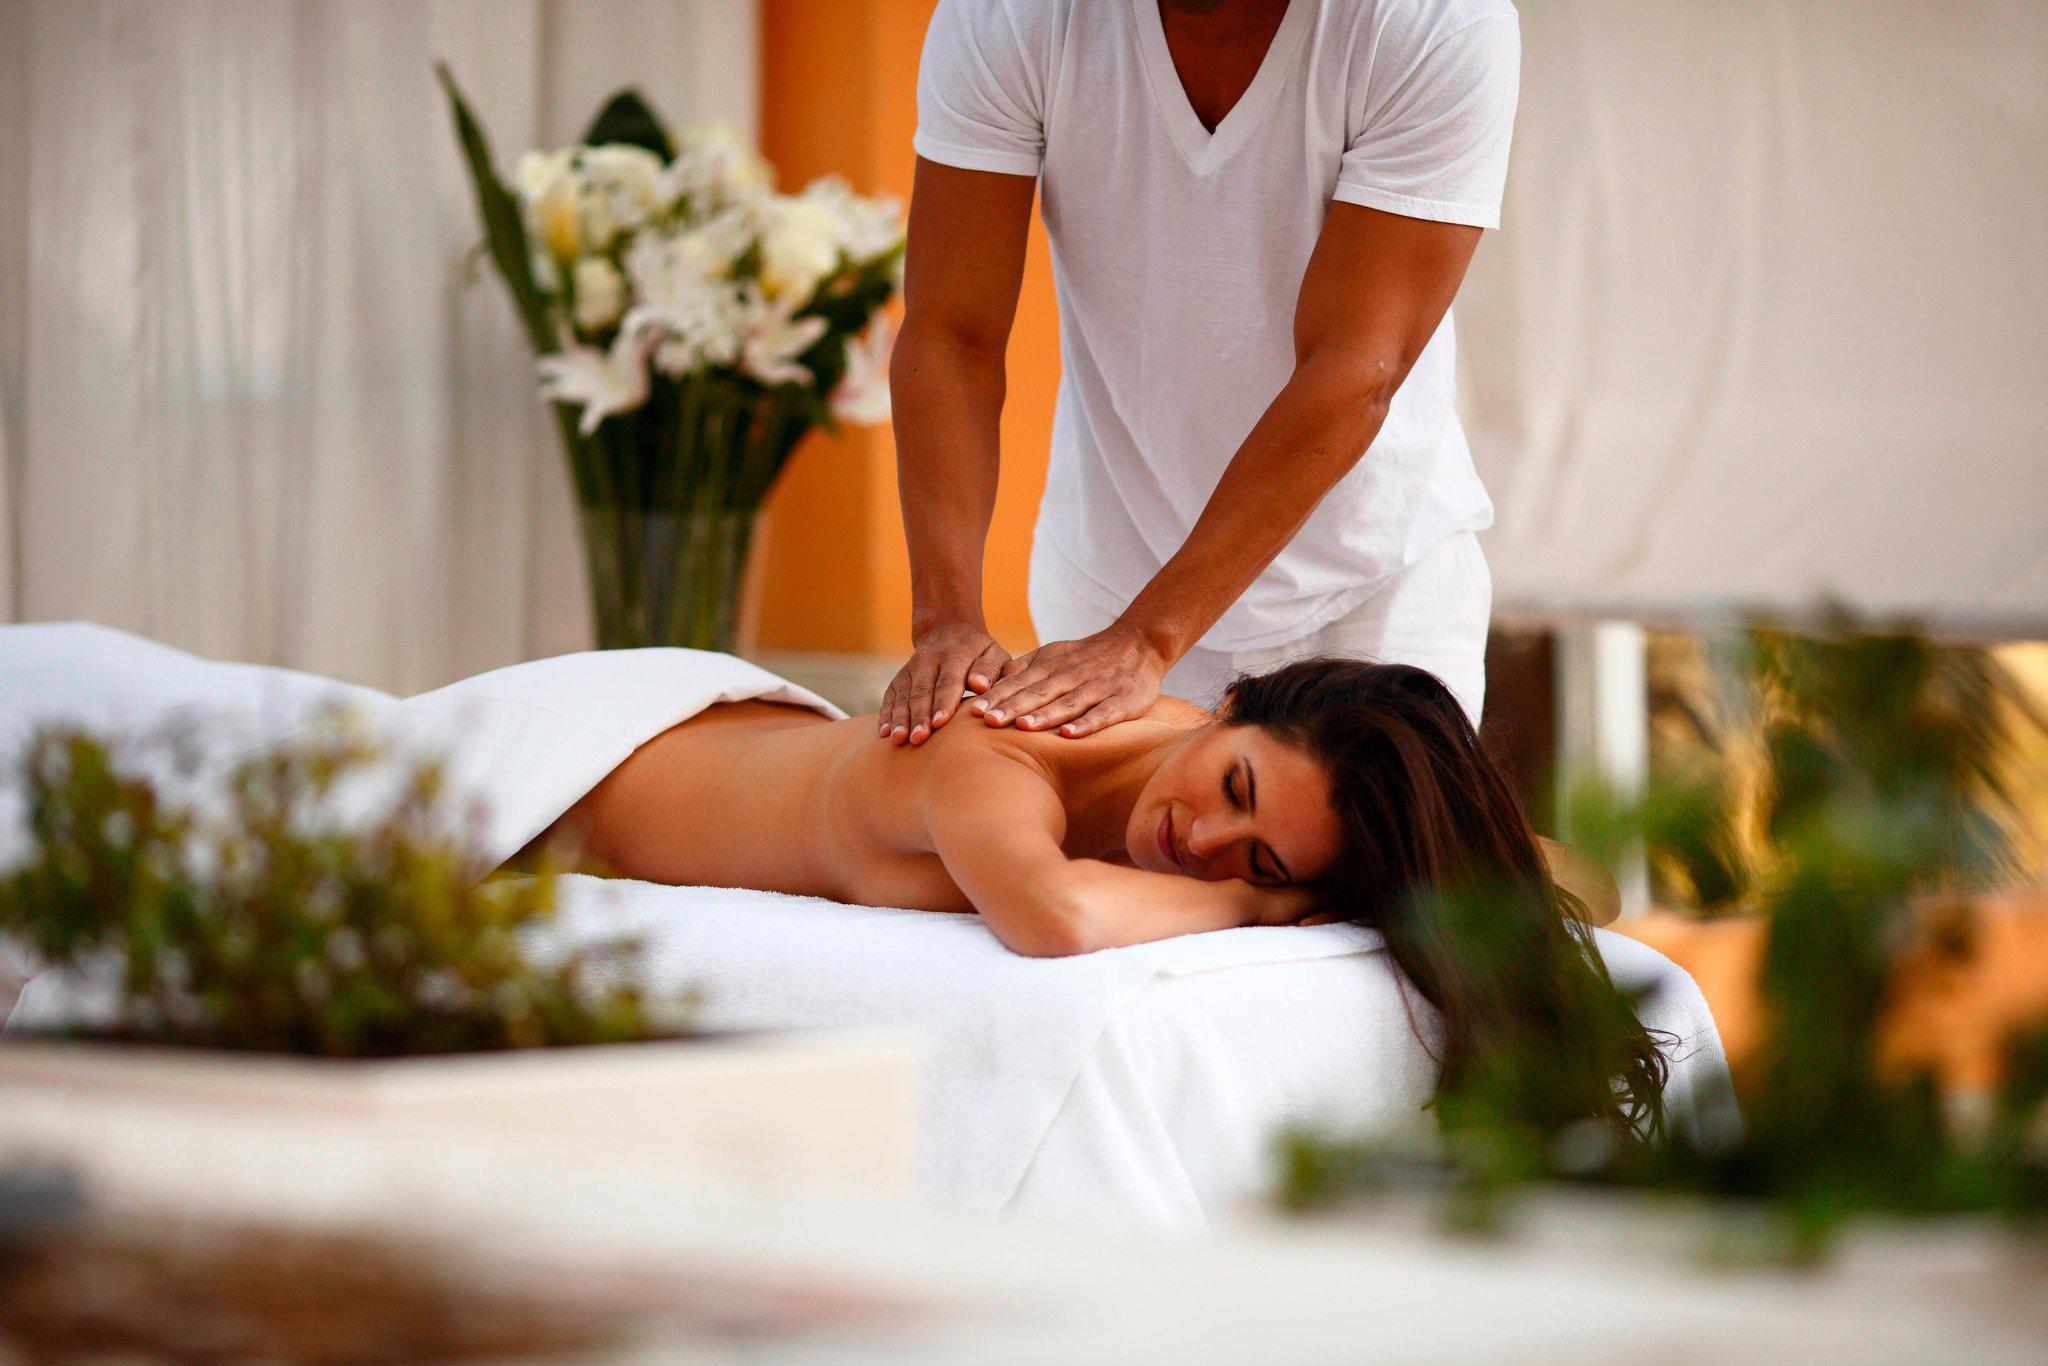 Asian massage in south beach florida